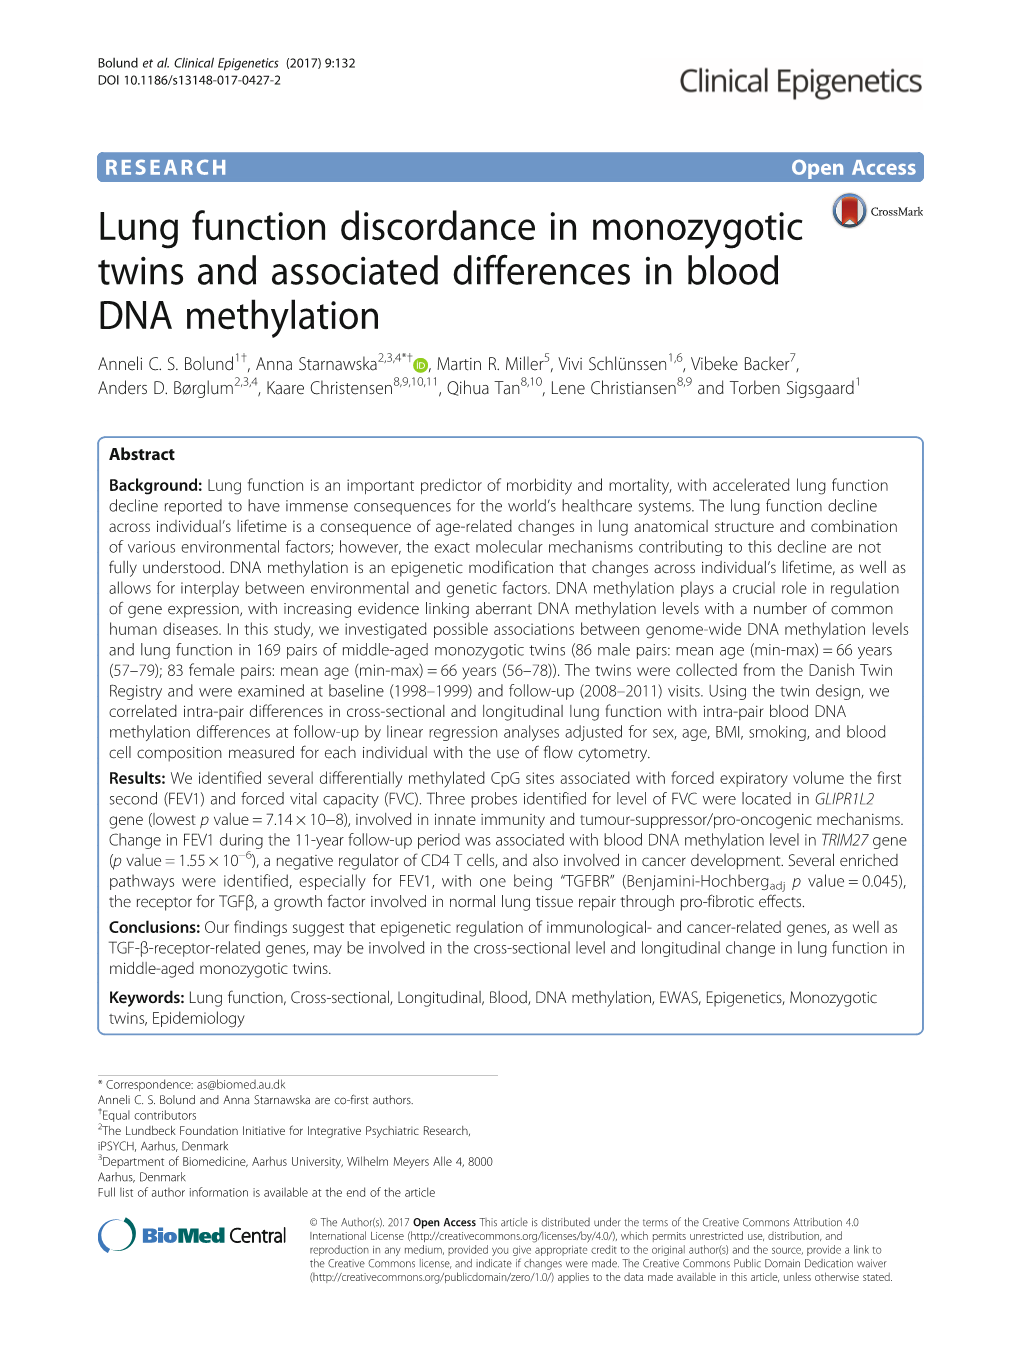 Lung Function Discordance in Monozygotic Twins and Associated Differences in Blood DNA Methylation Anneli C